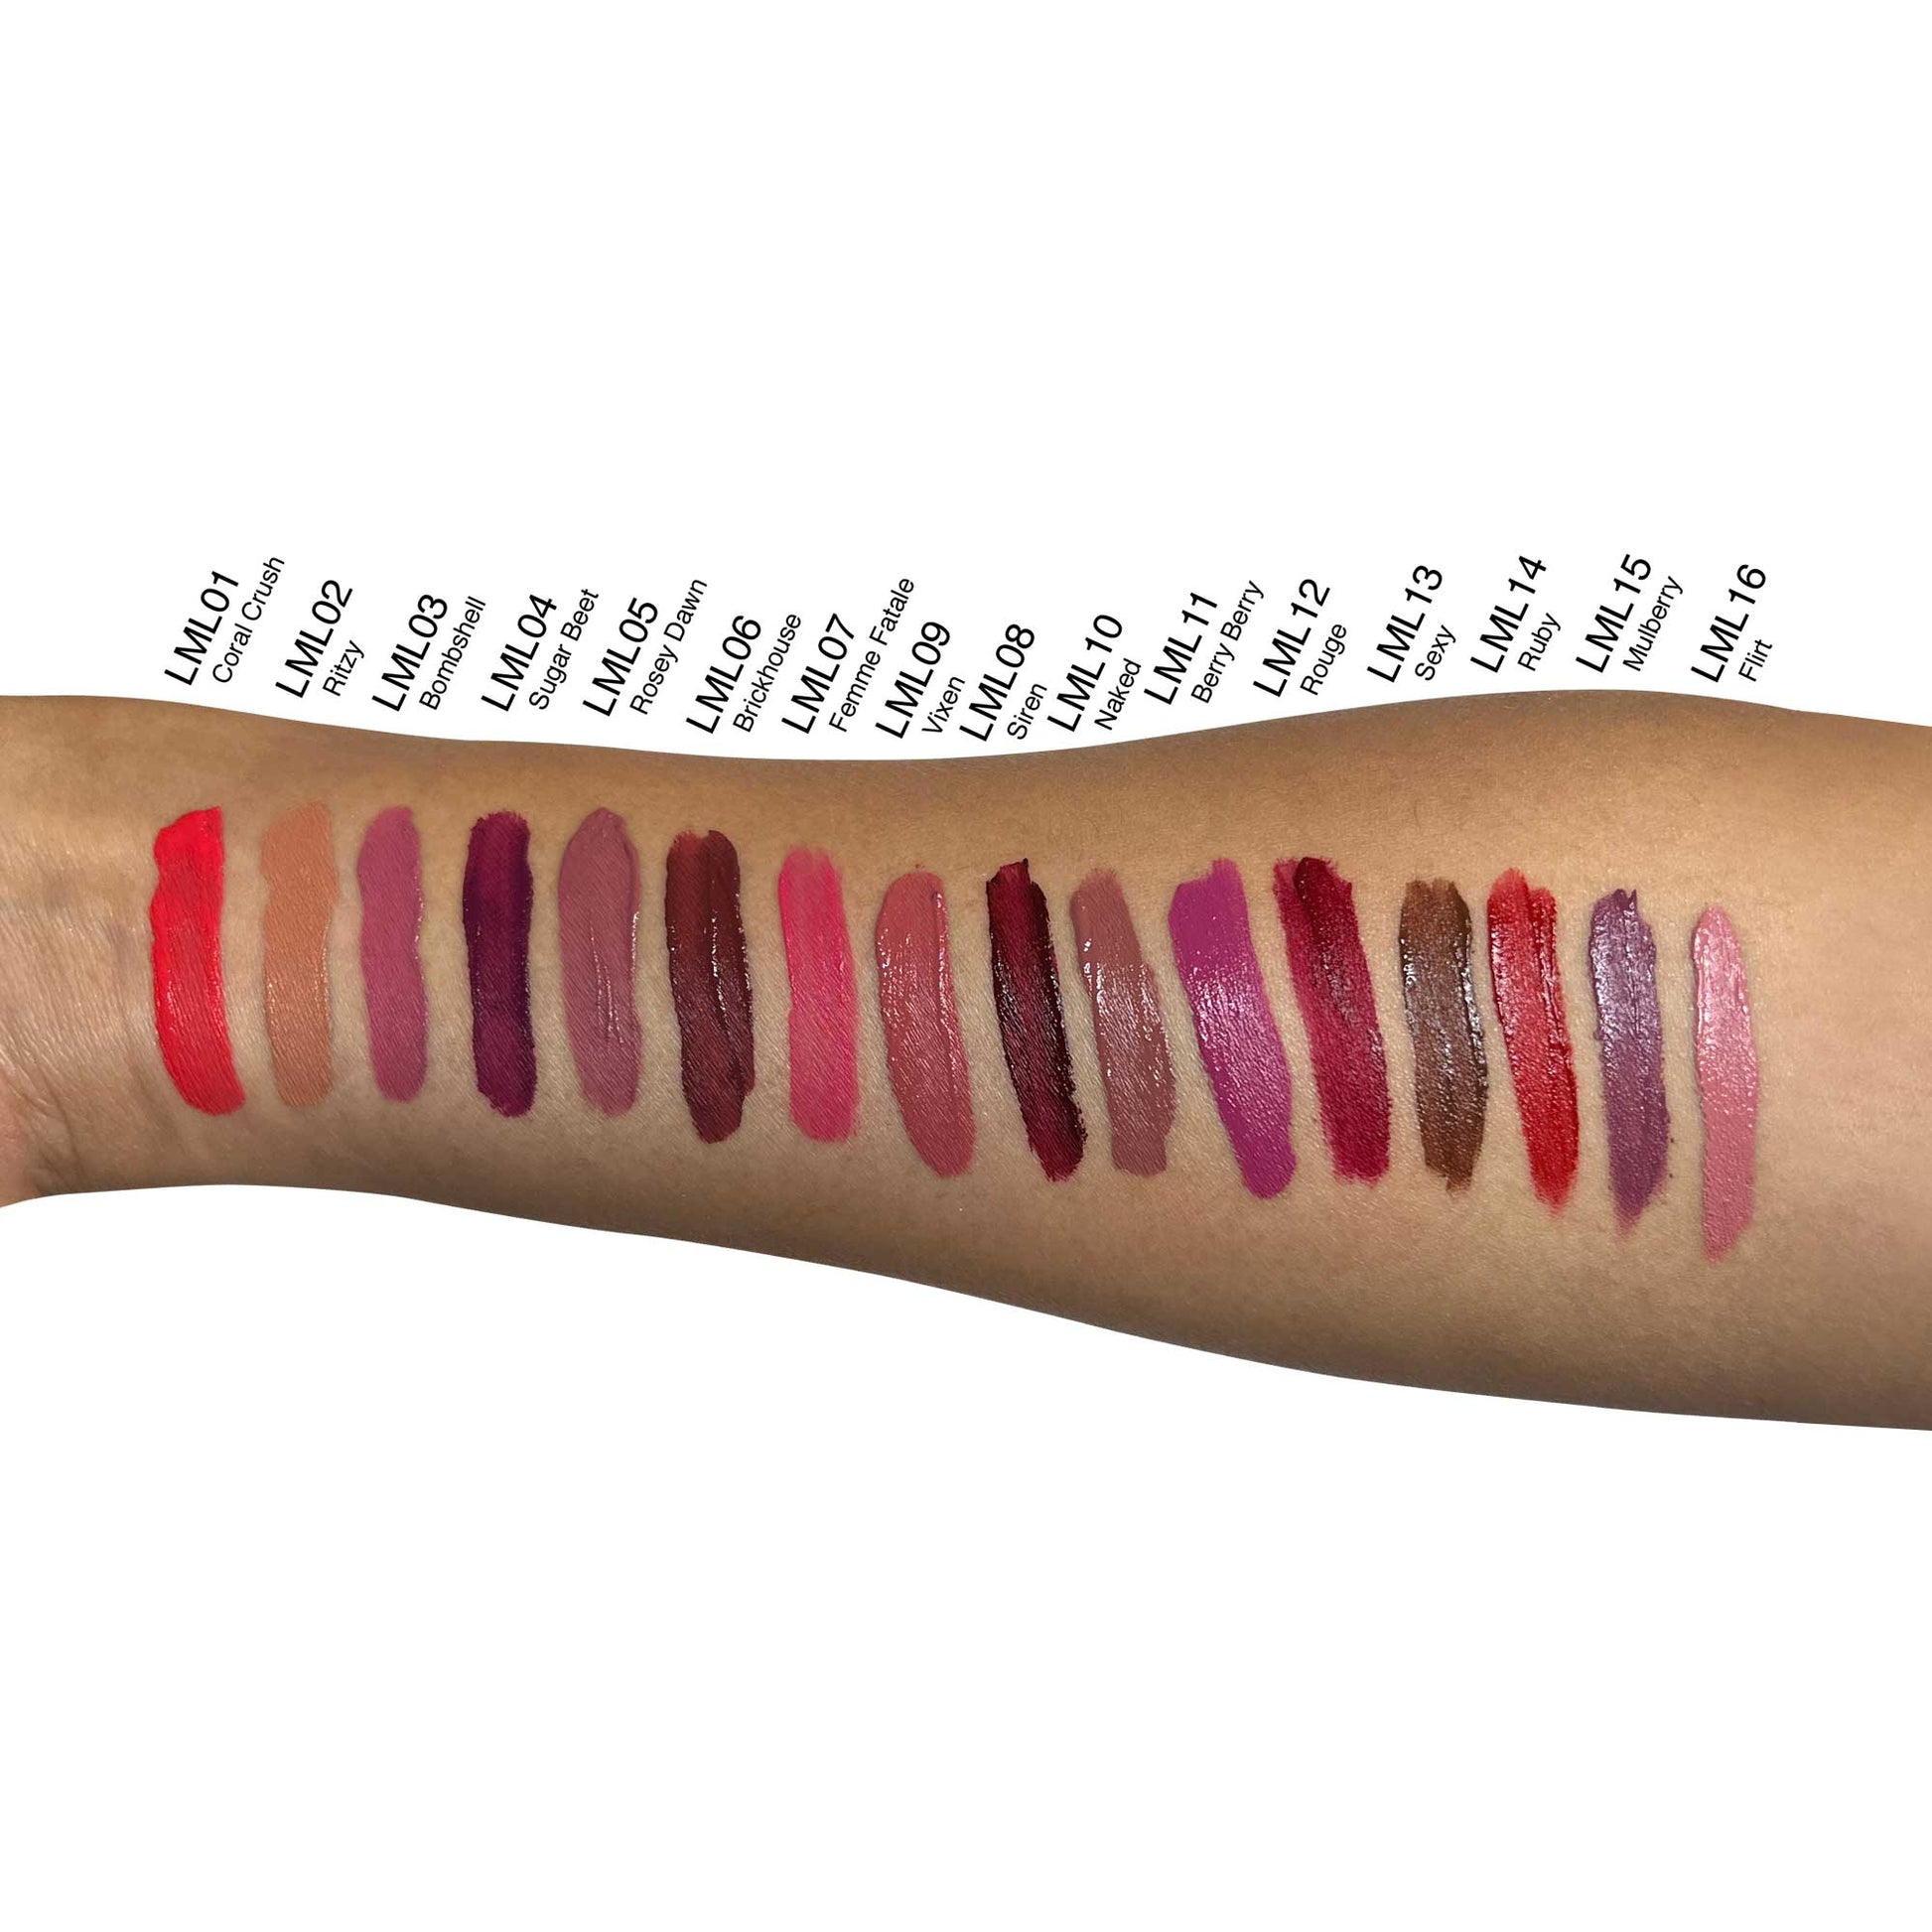 Cruisin Organics Ruby Liquid Lipstick. Our highly pigmented liquid to matte formula is perfect for any occasion. Featuring a convenient slanted doe applicator, this lipstick is ideal for quick touchups on-the-go. Keep your lips hydrated and protected during any adventure with Cruisin Organics.